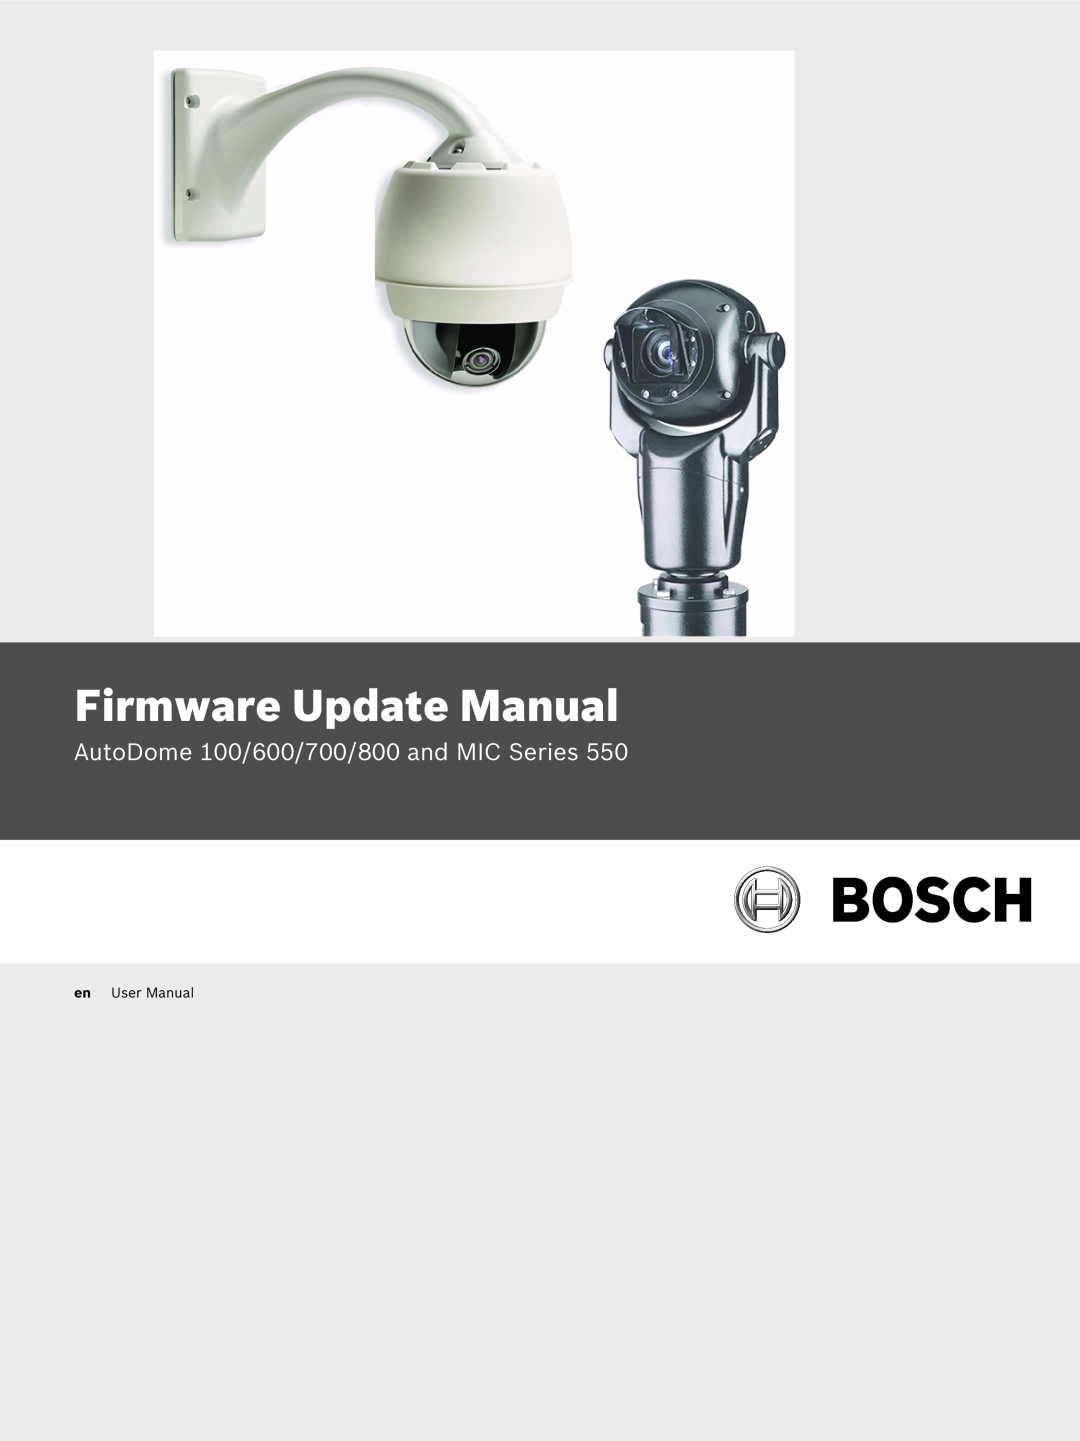 Bosch Appliances 600 operating instructions Troubleshoot resources for homeowner, Water Wizard 